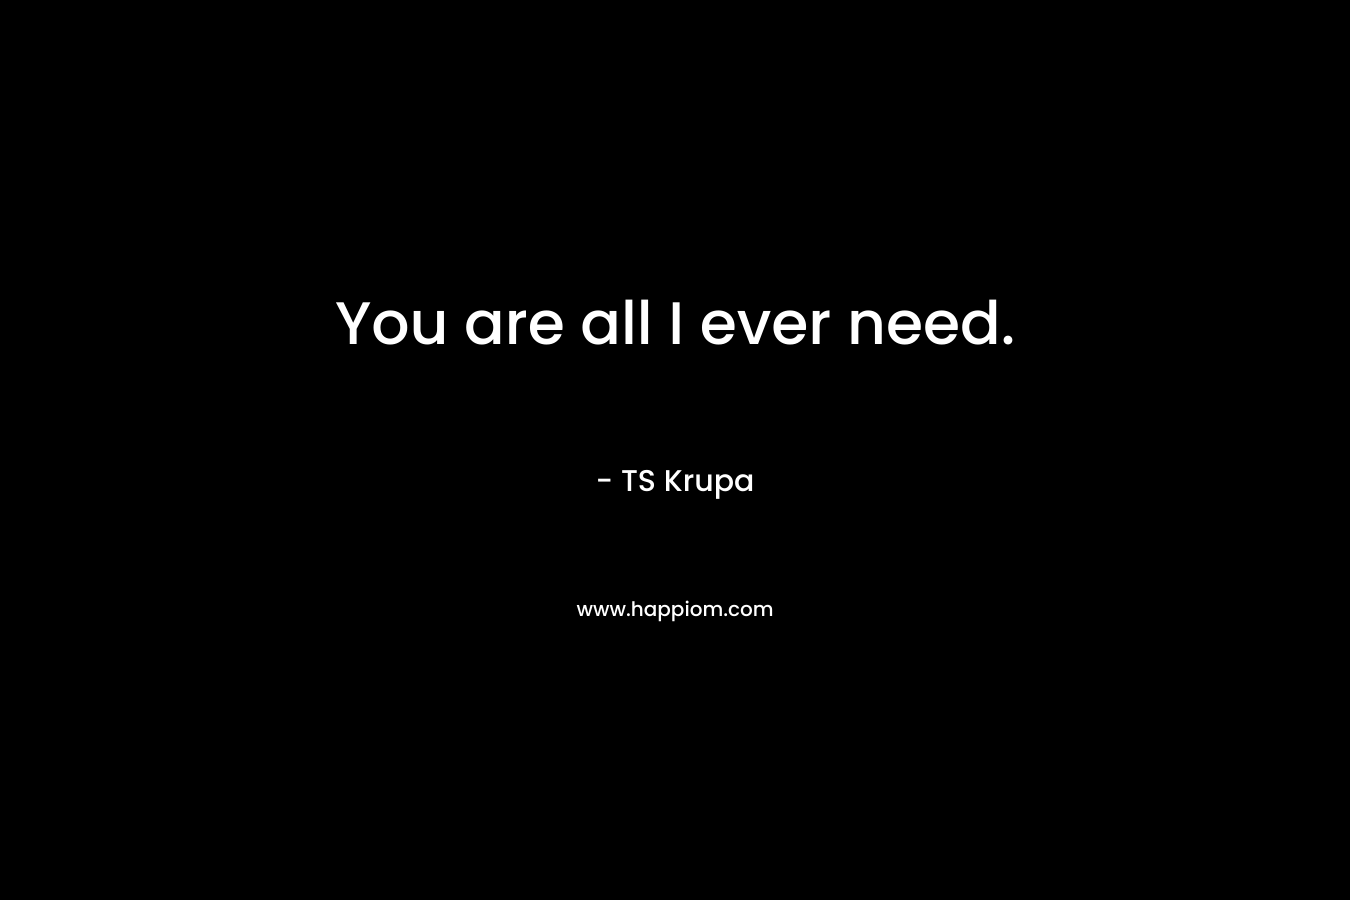 You are all I ever need.